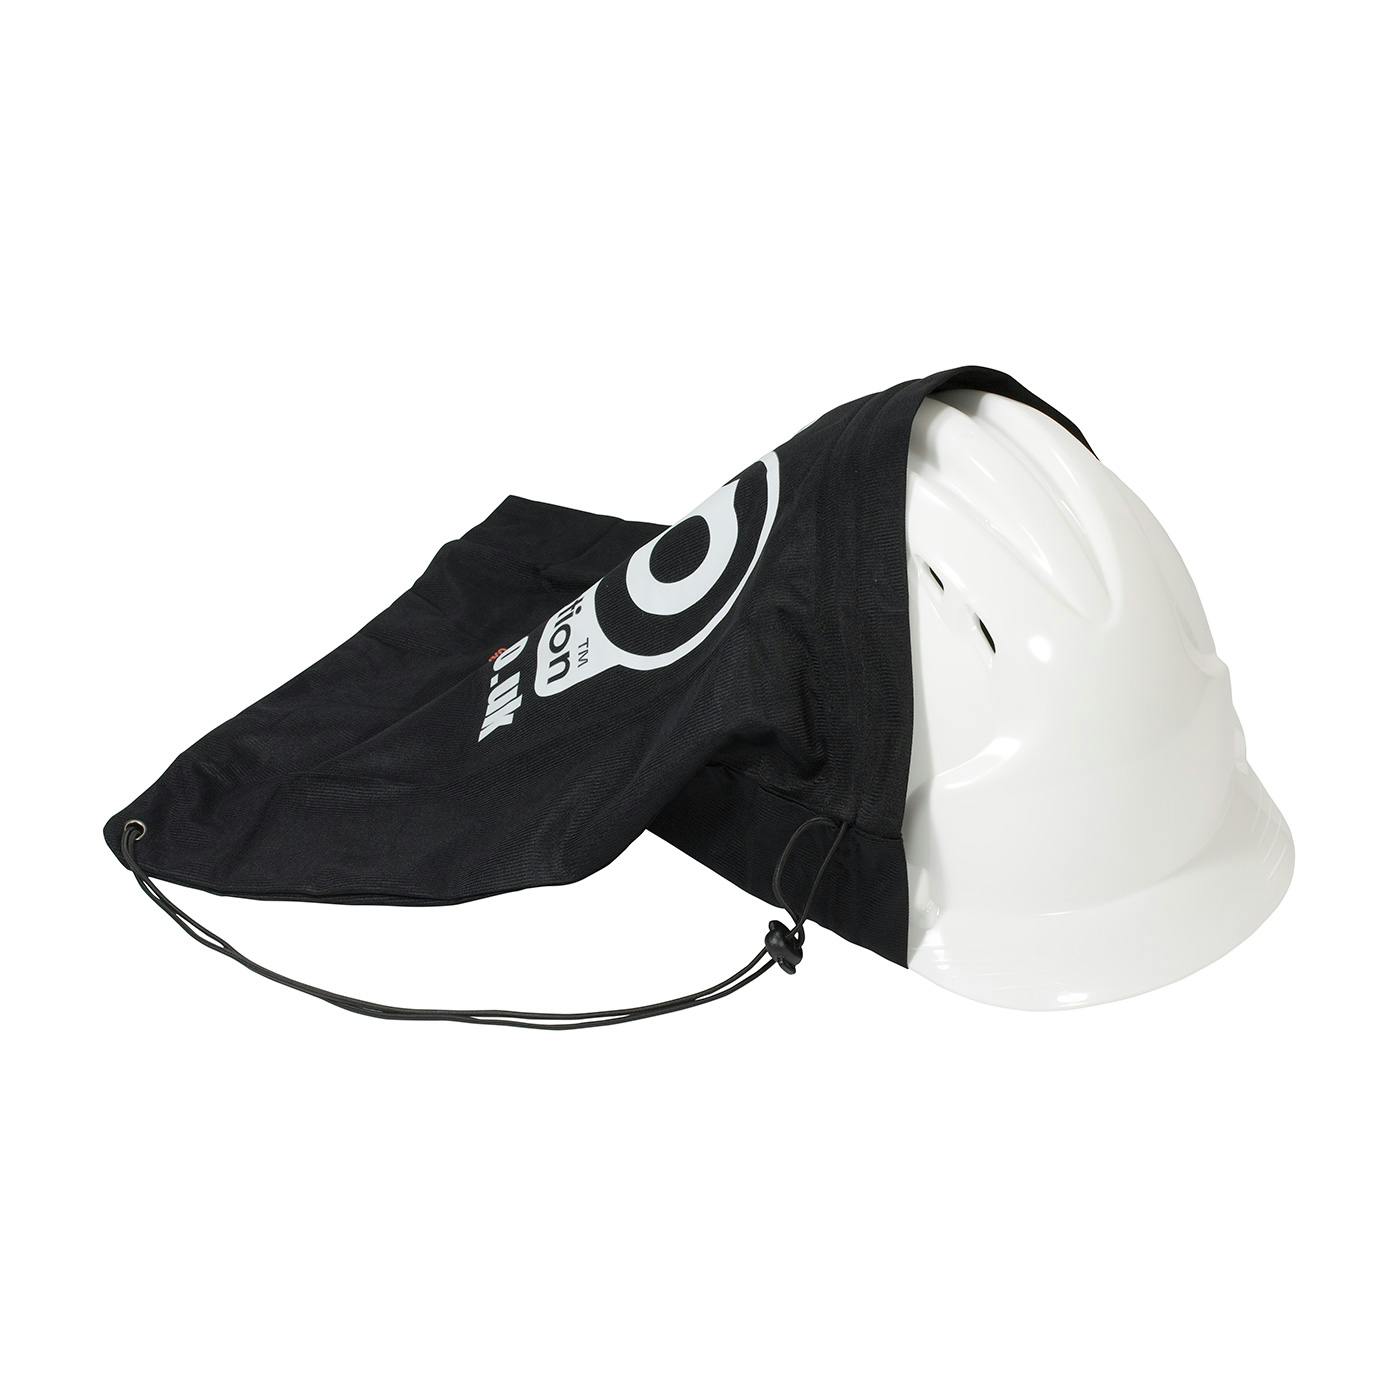 MK8 Evolution® Vented, Type II Linesman Hard Hat with HDPE Shell, EPS Impact Liner, Polyester Suspension, Wheel Ratchet Adjustment and 4-Point Chin Strap (280-AHS240V)